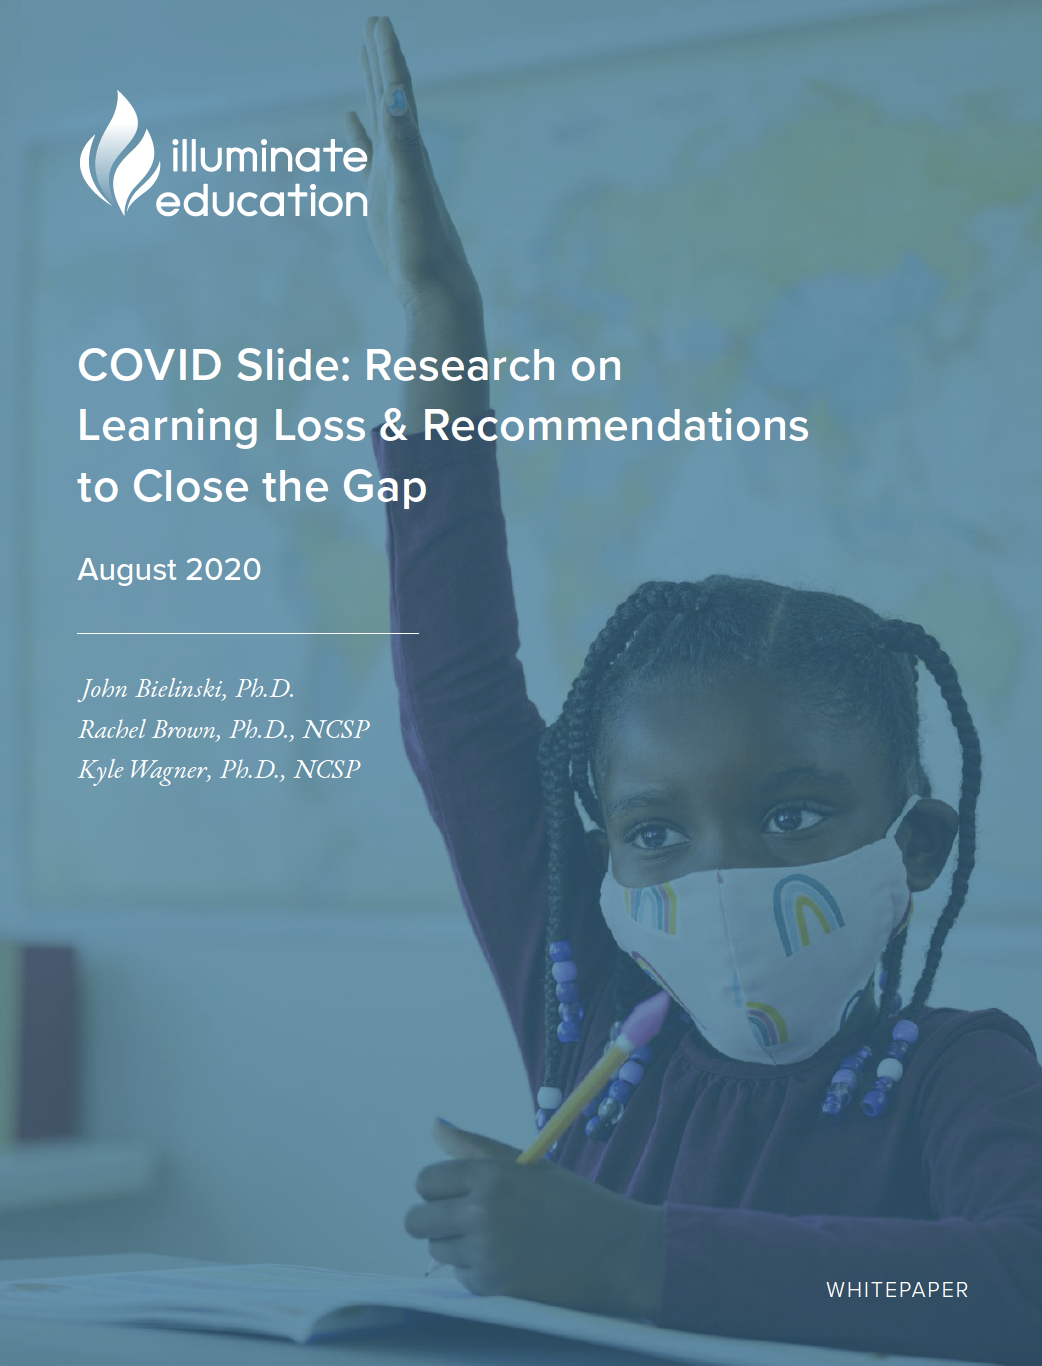 COVID Slide: Research on Learning Loss & Recommendations to Close the Gap